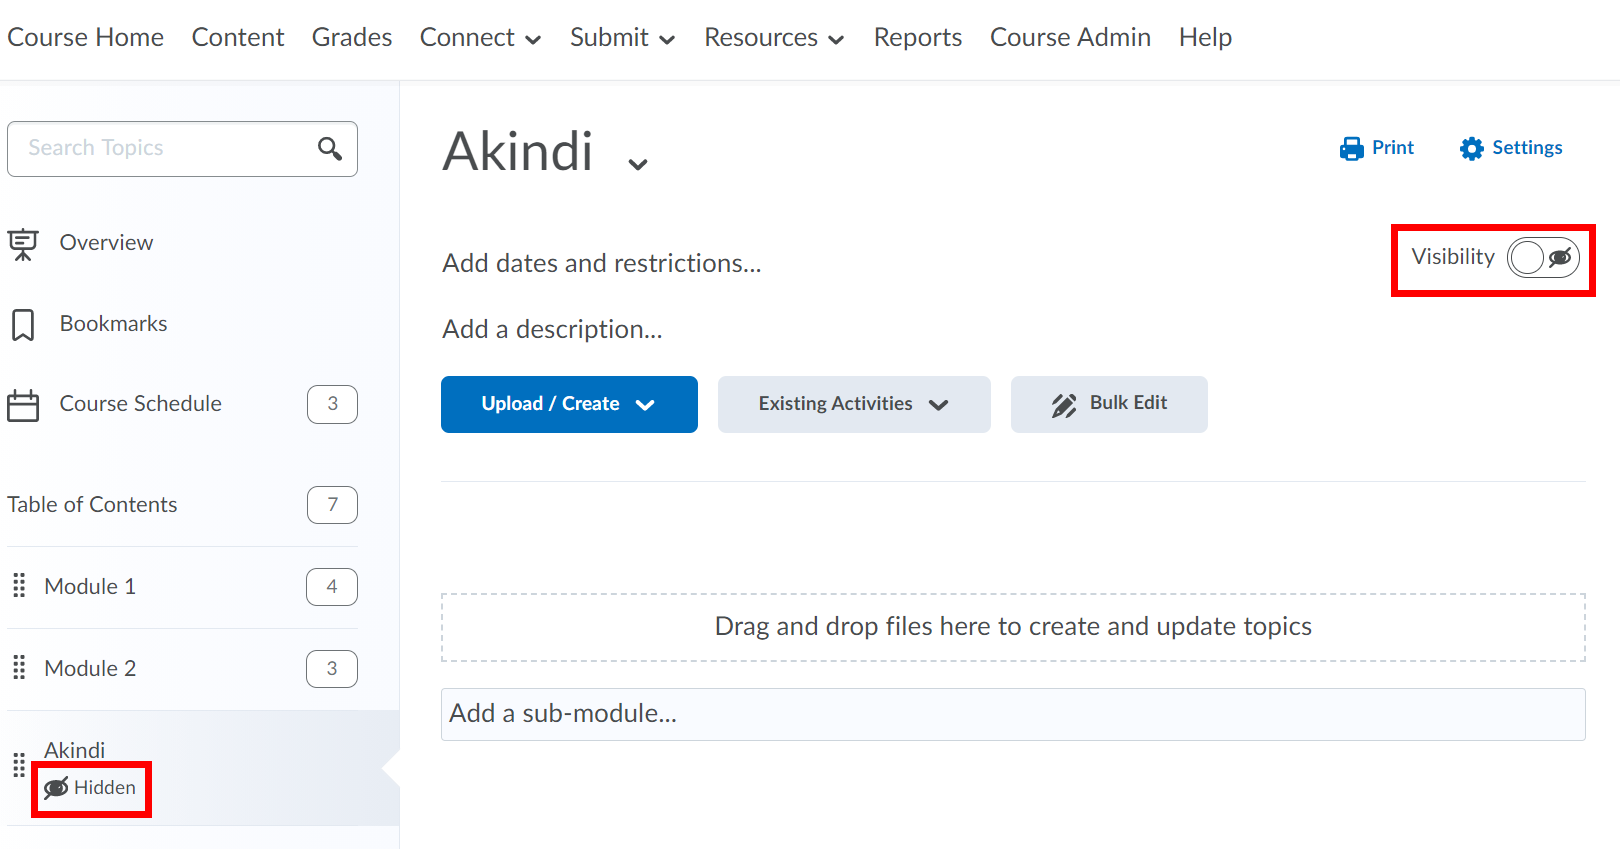 Akindi module with the visibility set to hidden and highlighted.